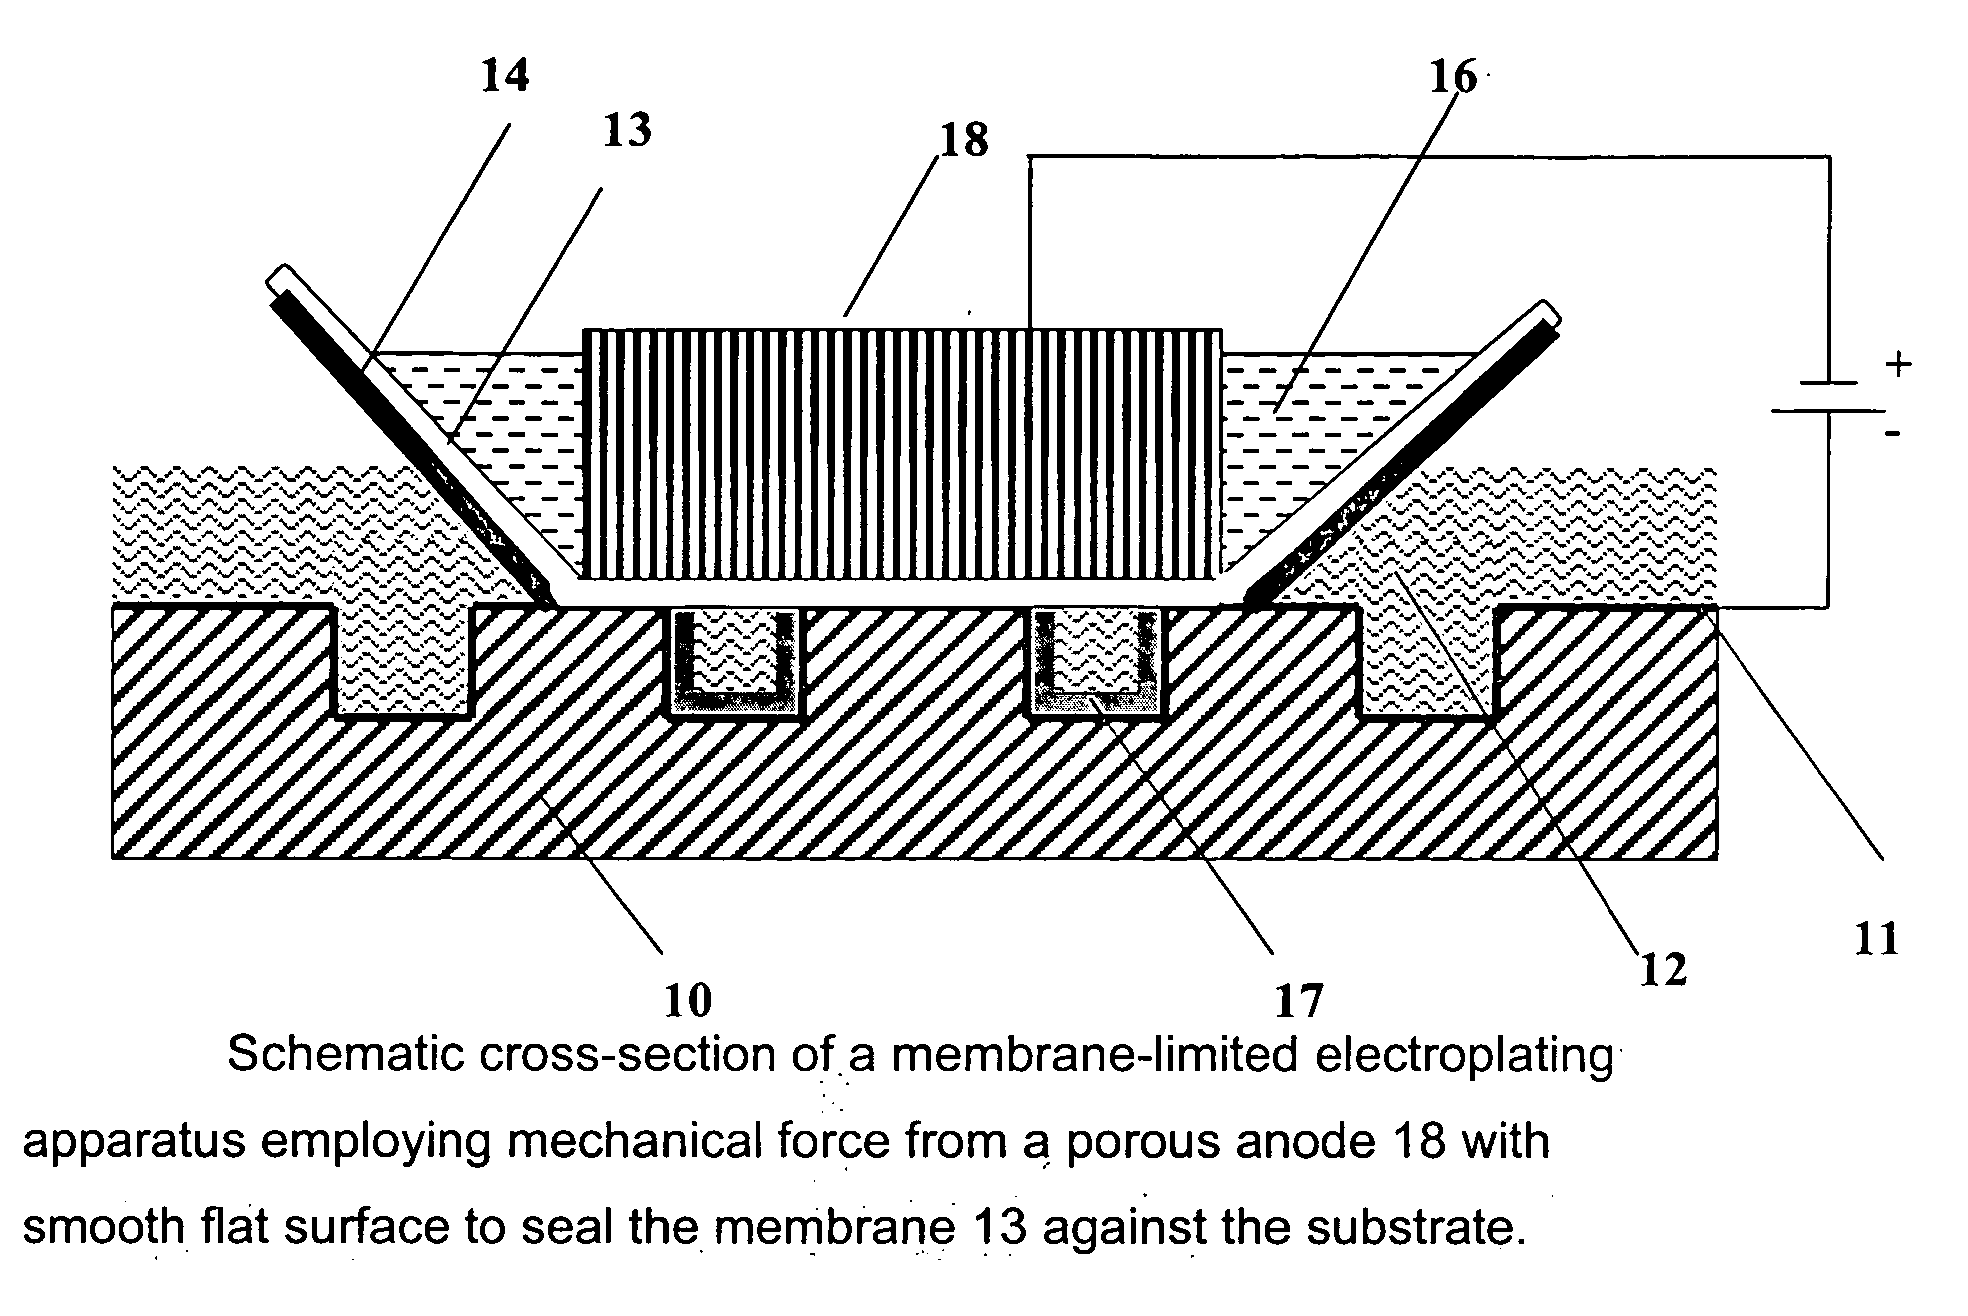 Membrane-limited selective electroplating of a conductive surface